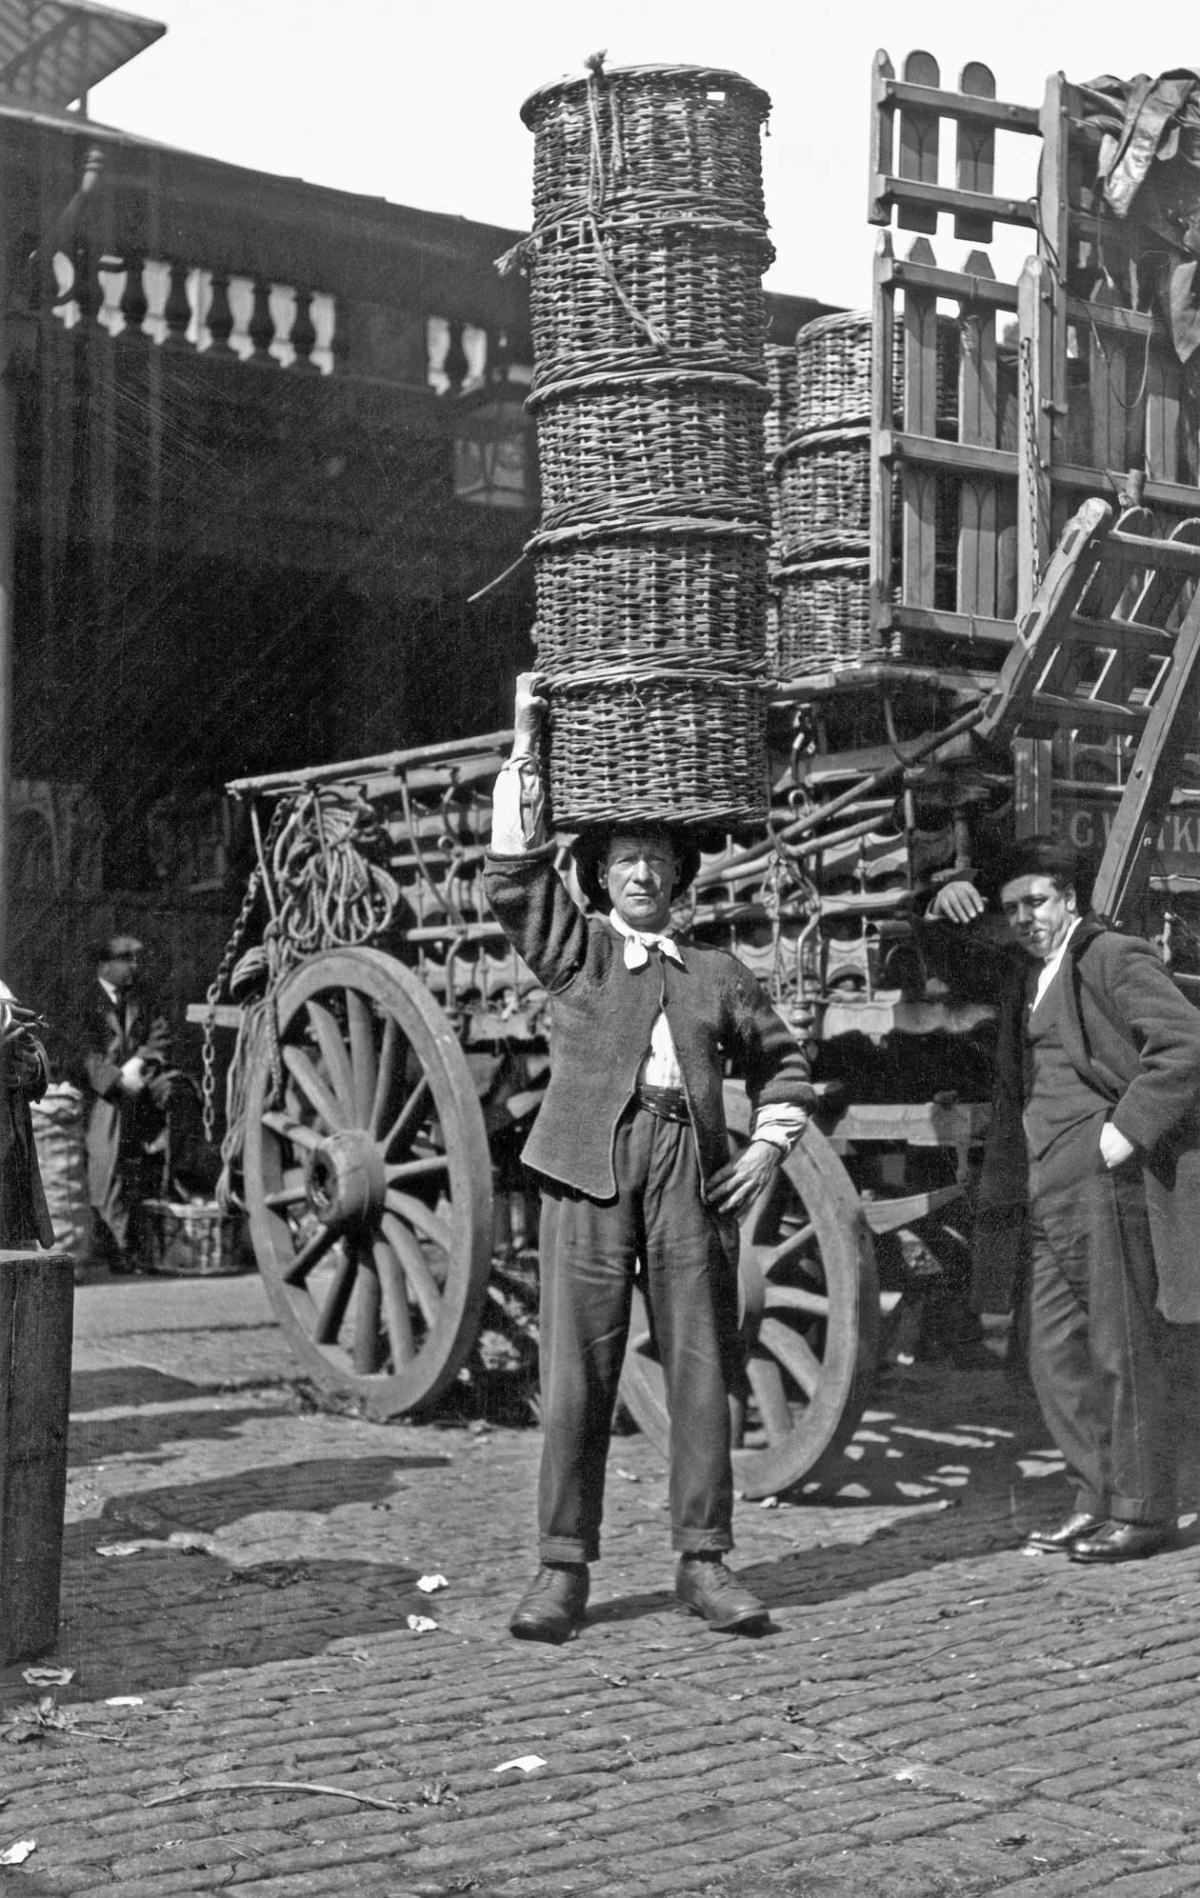 A market trader with a stack of baskets, 1915.